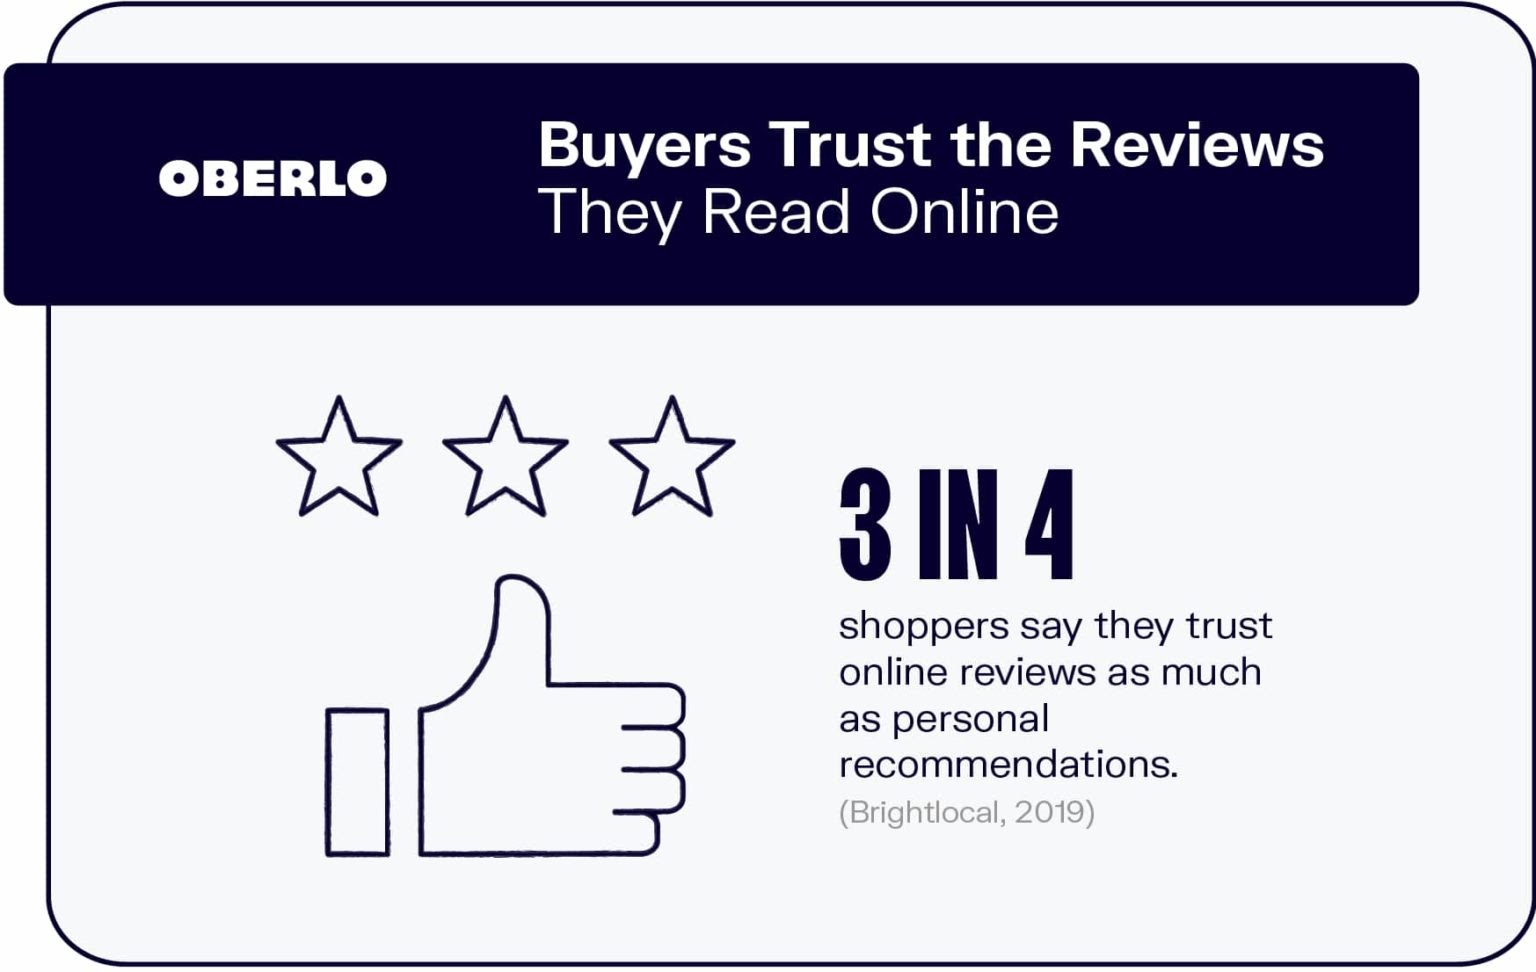 Buyers that trust reviews